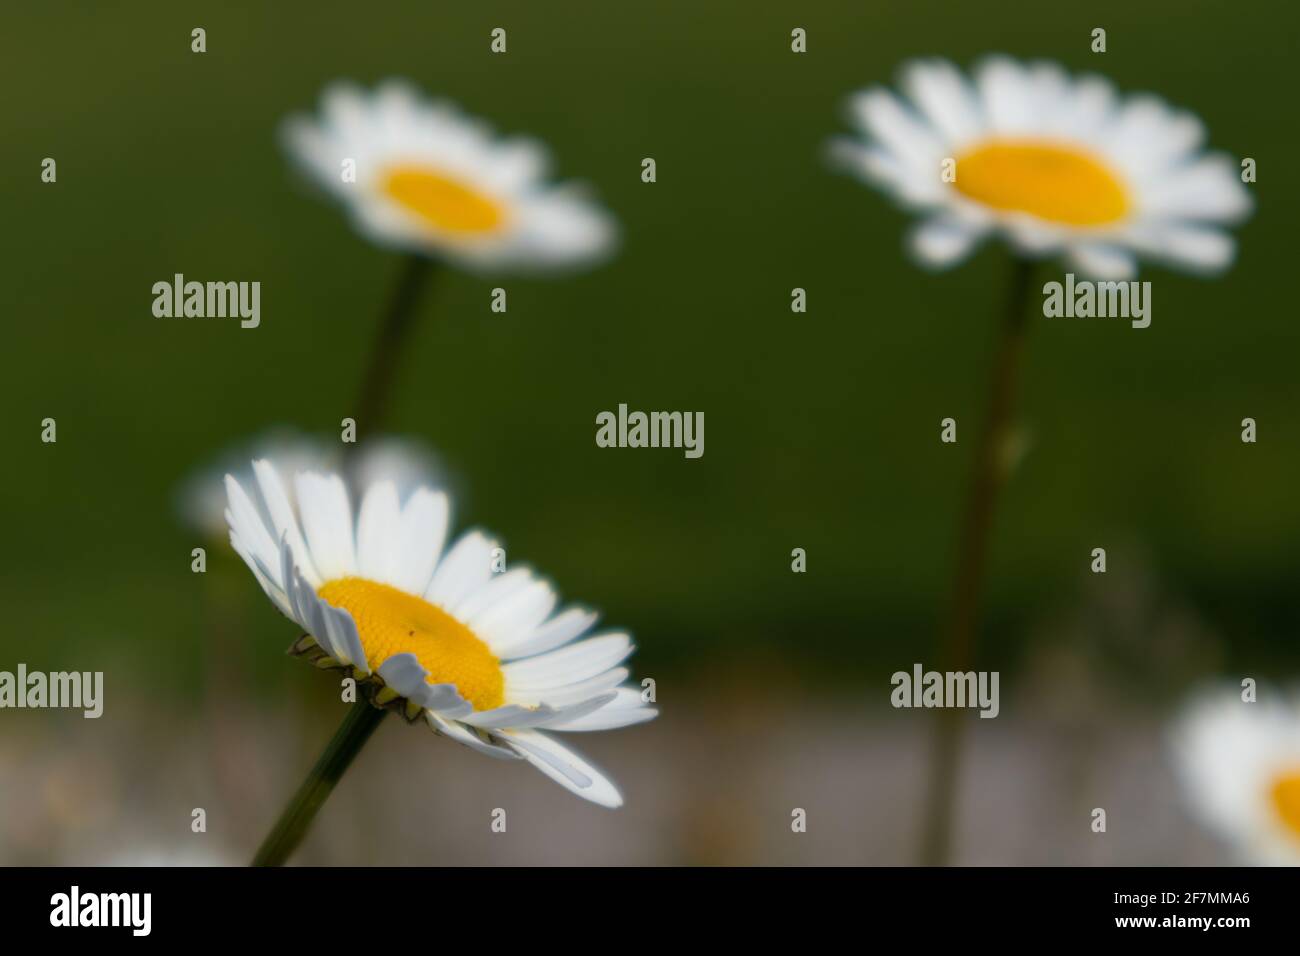 White daisy flower in green background, Italy  Stock Photo